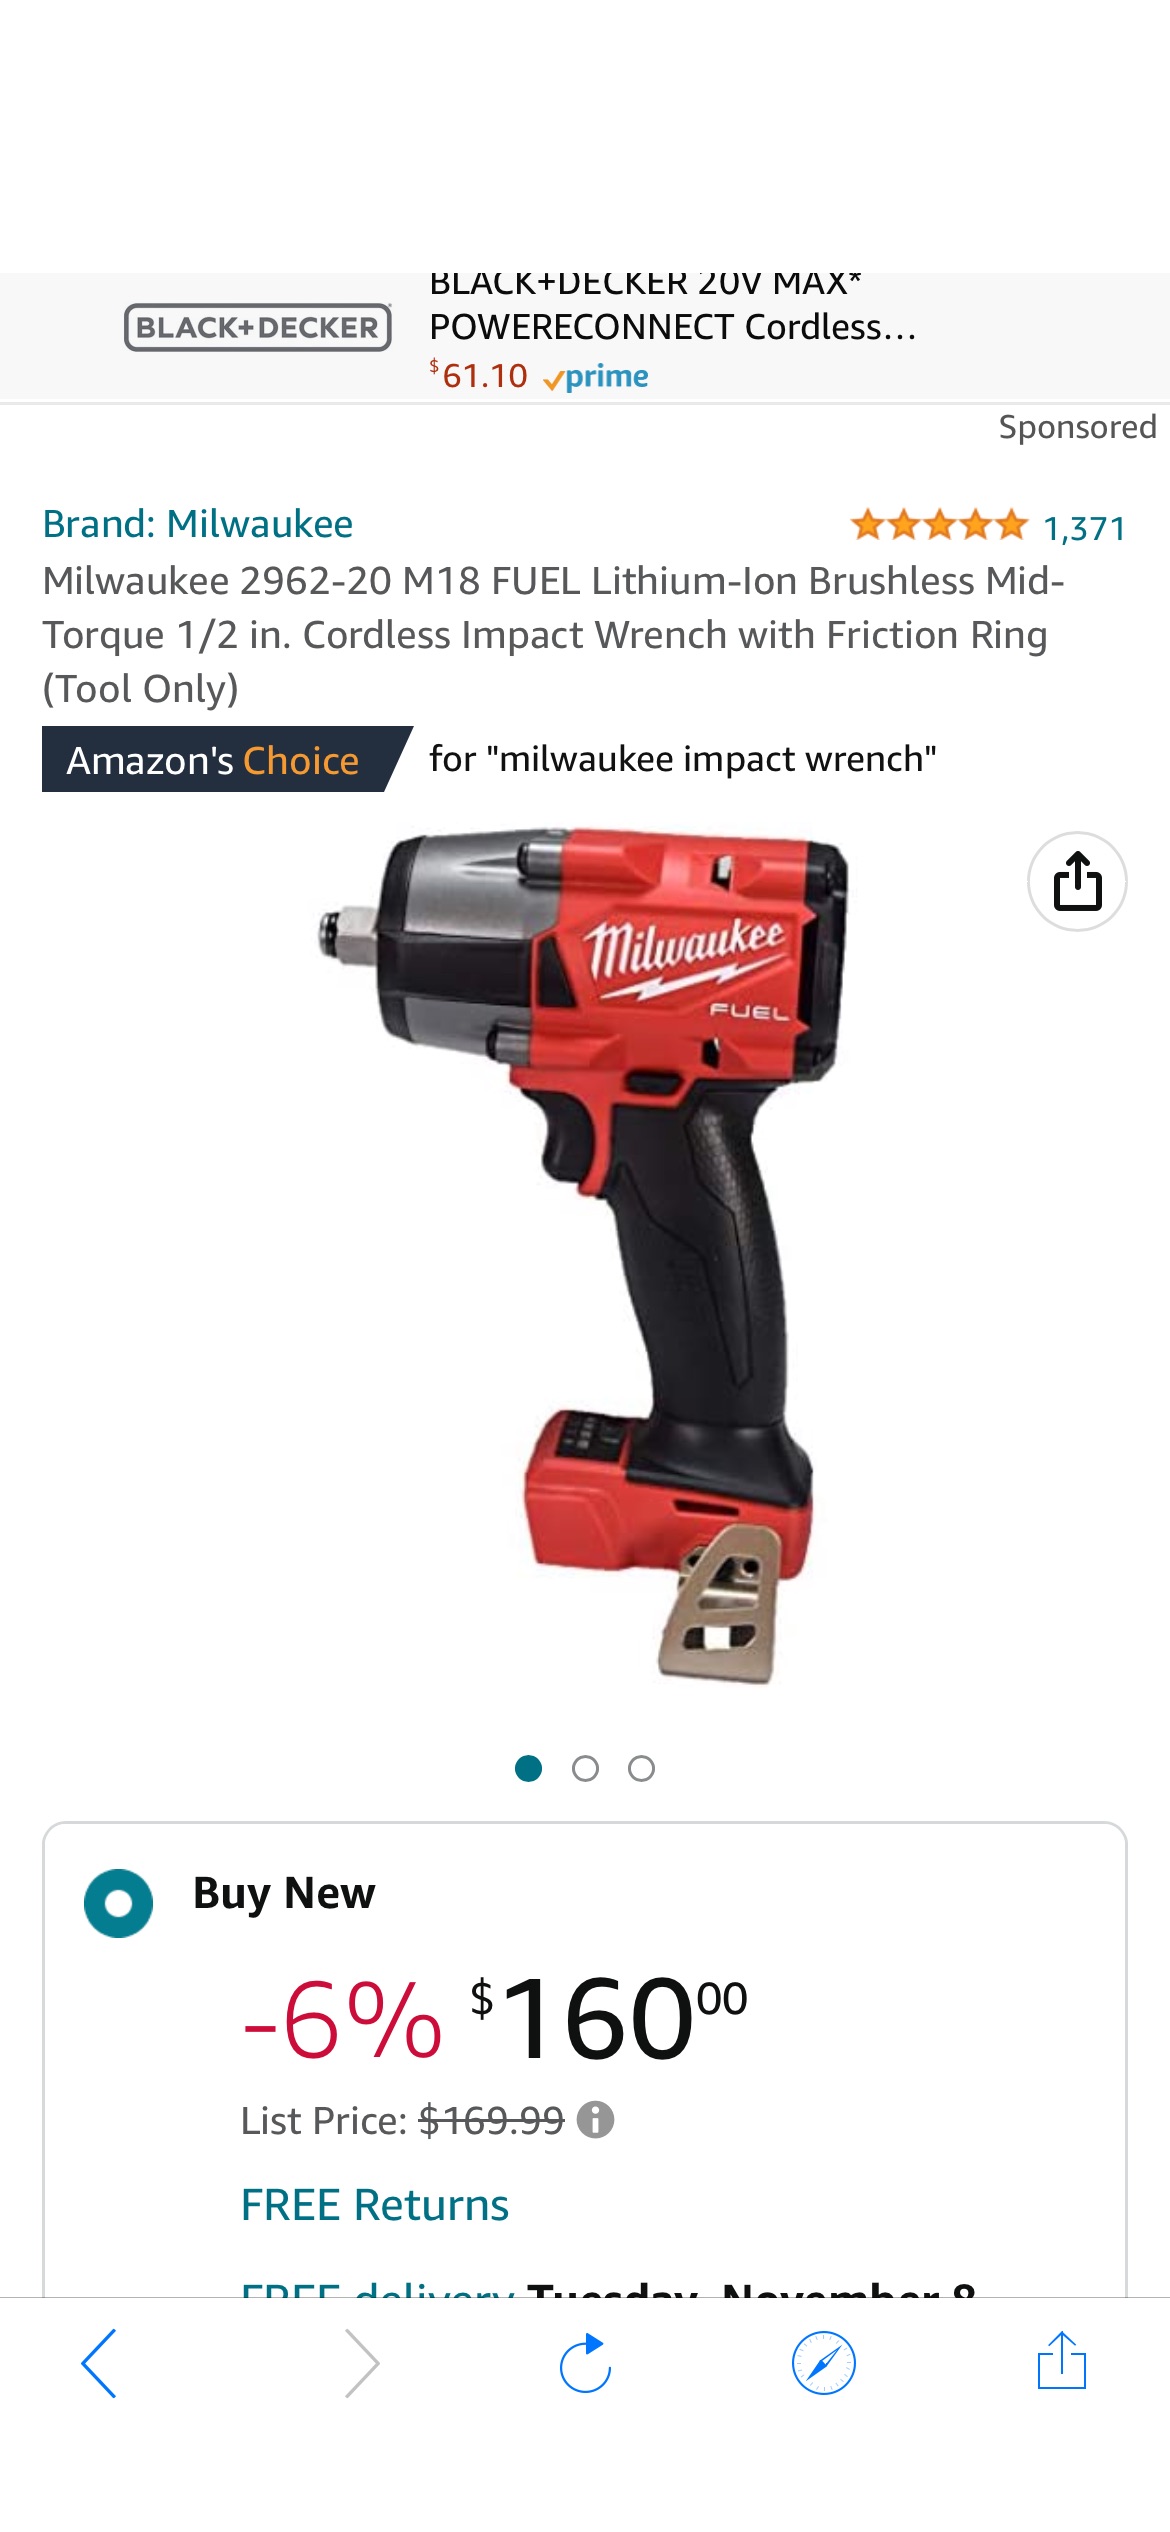 Milwaukee 2962-20 M18 FUEL Lithium-Ion Brushless Mid-Torque 1/2 in. Cordless Impact Wrench with Friction Ring (Tool Only) - - Amazon.com